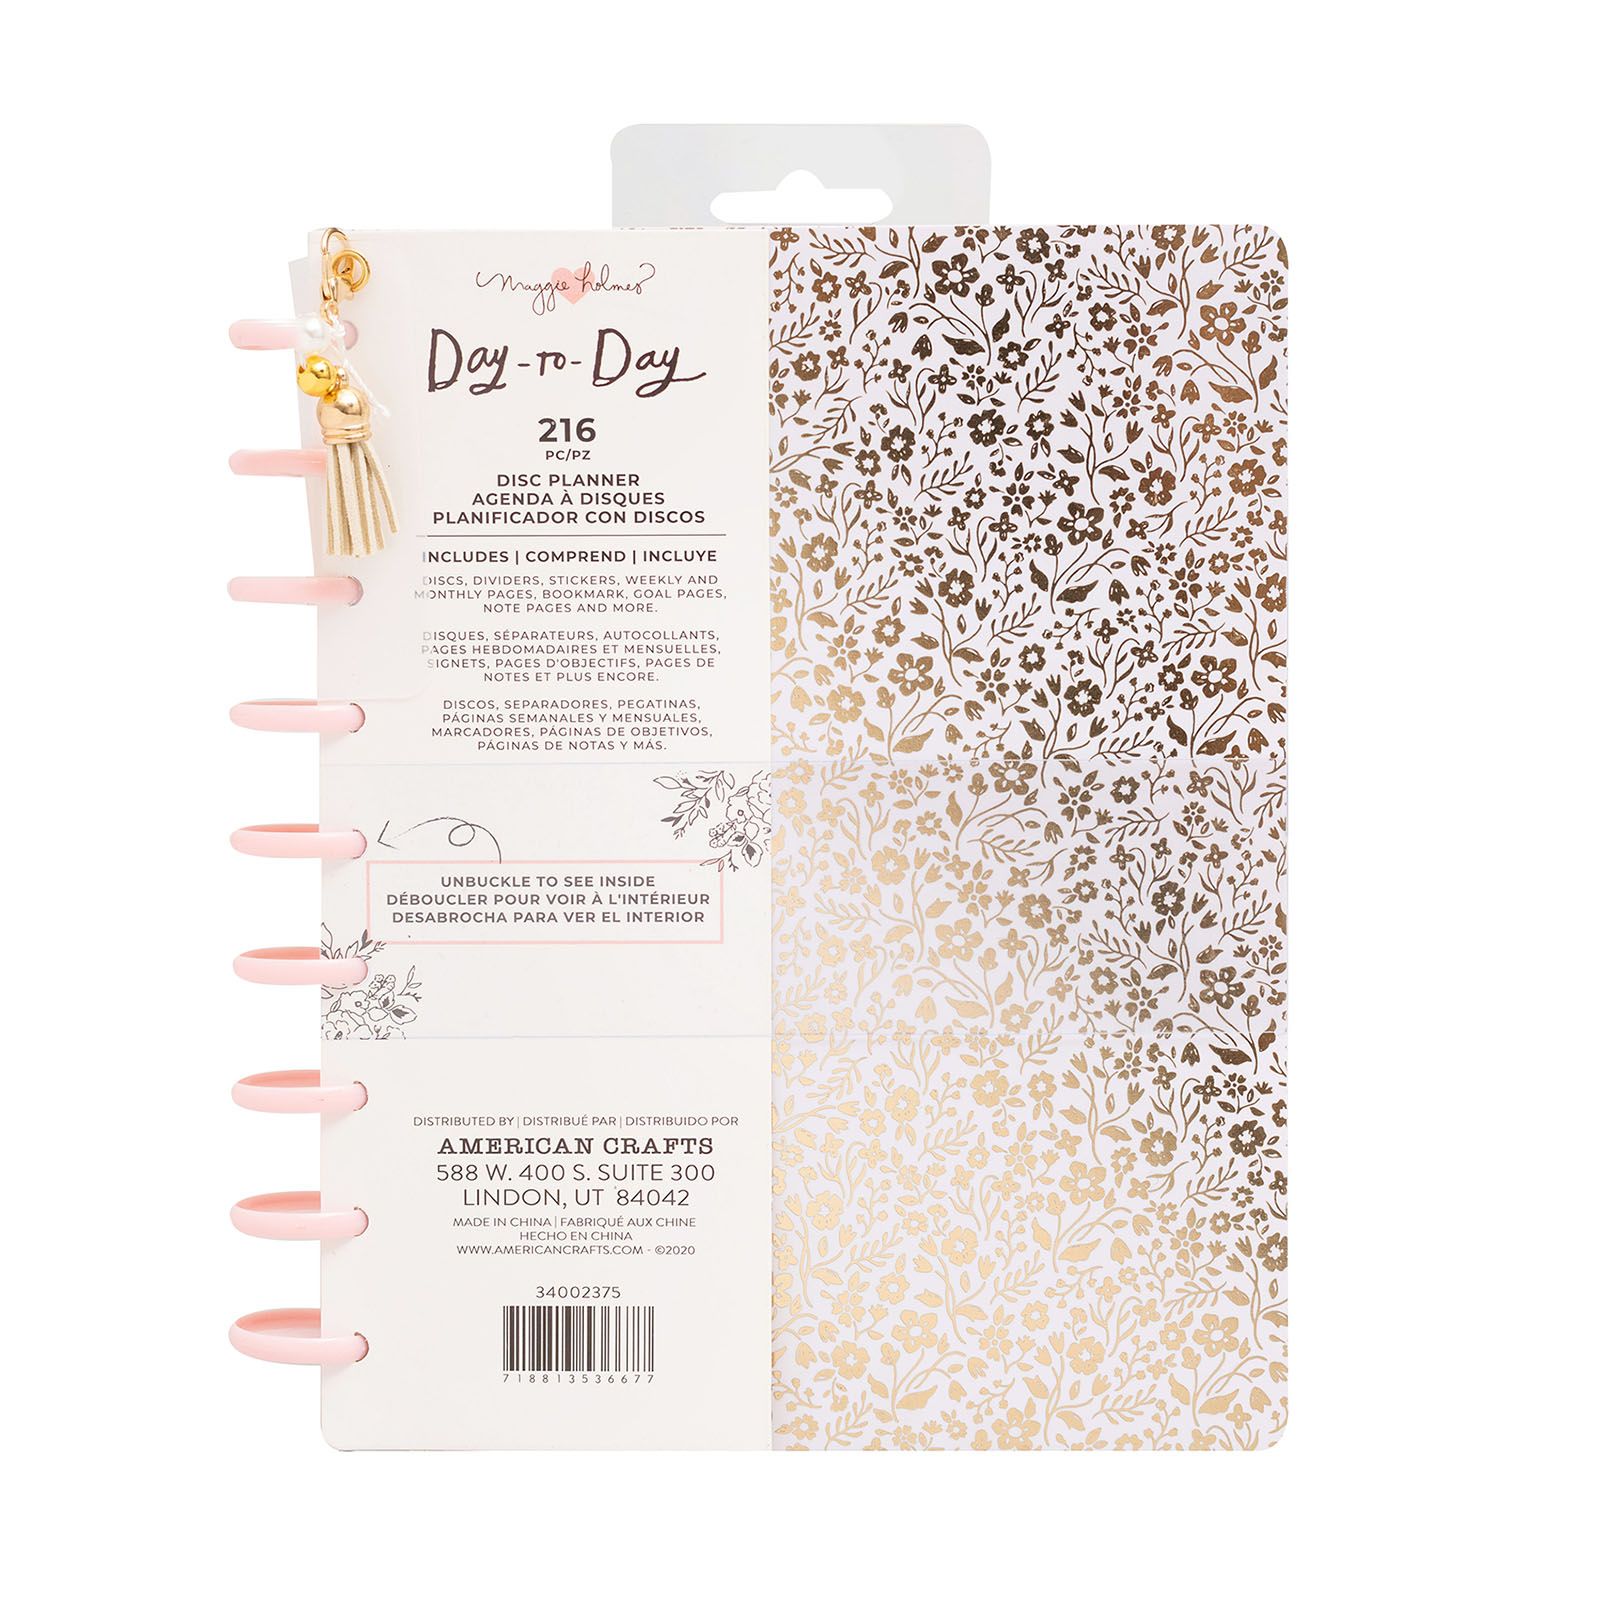 Crate Paper • Day-to-Day disc planner Gold floral